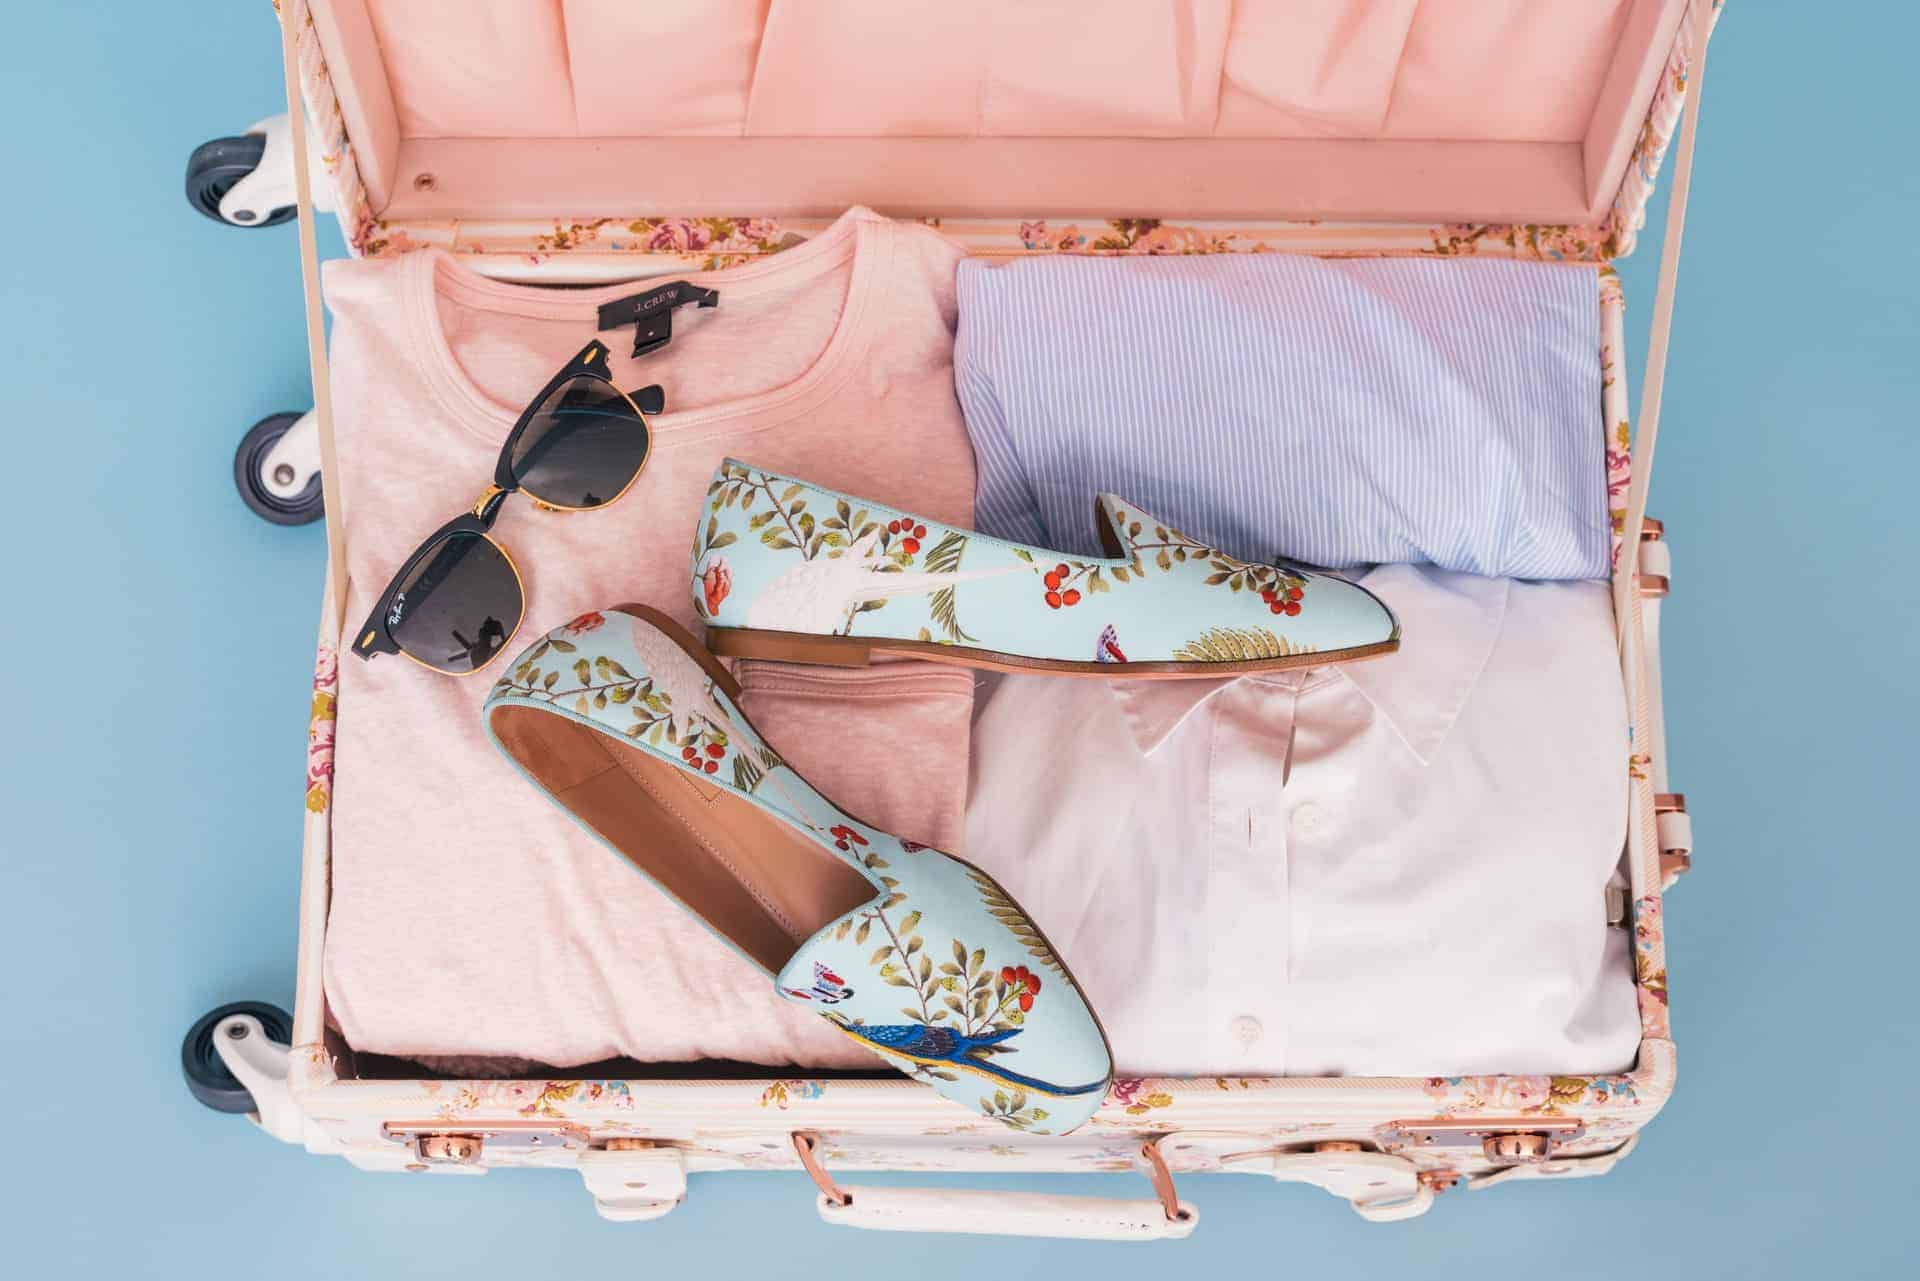 Do you travel often? Find out what to look for when buying a travel suitcase